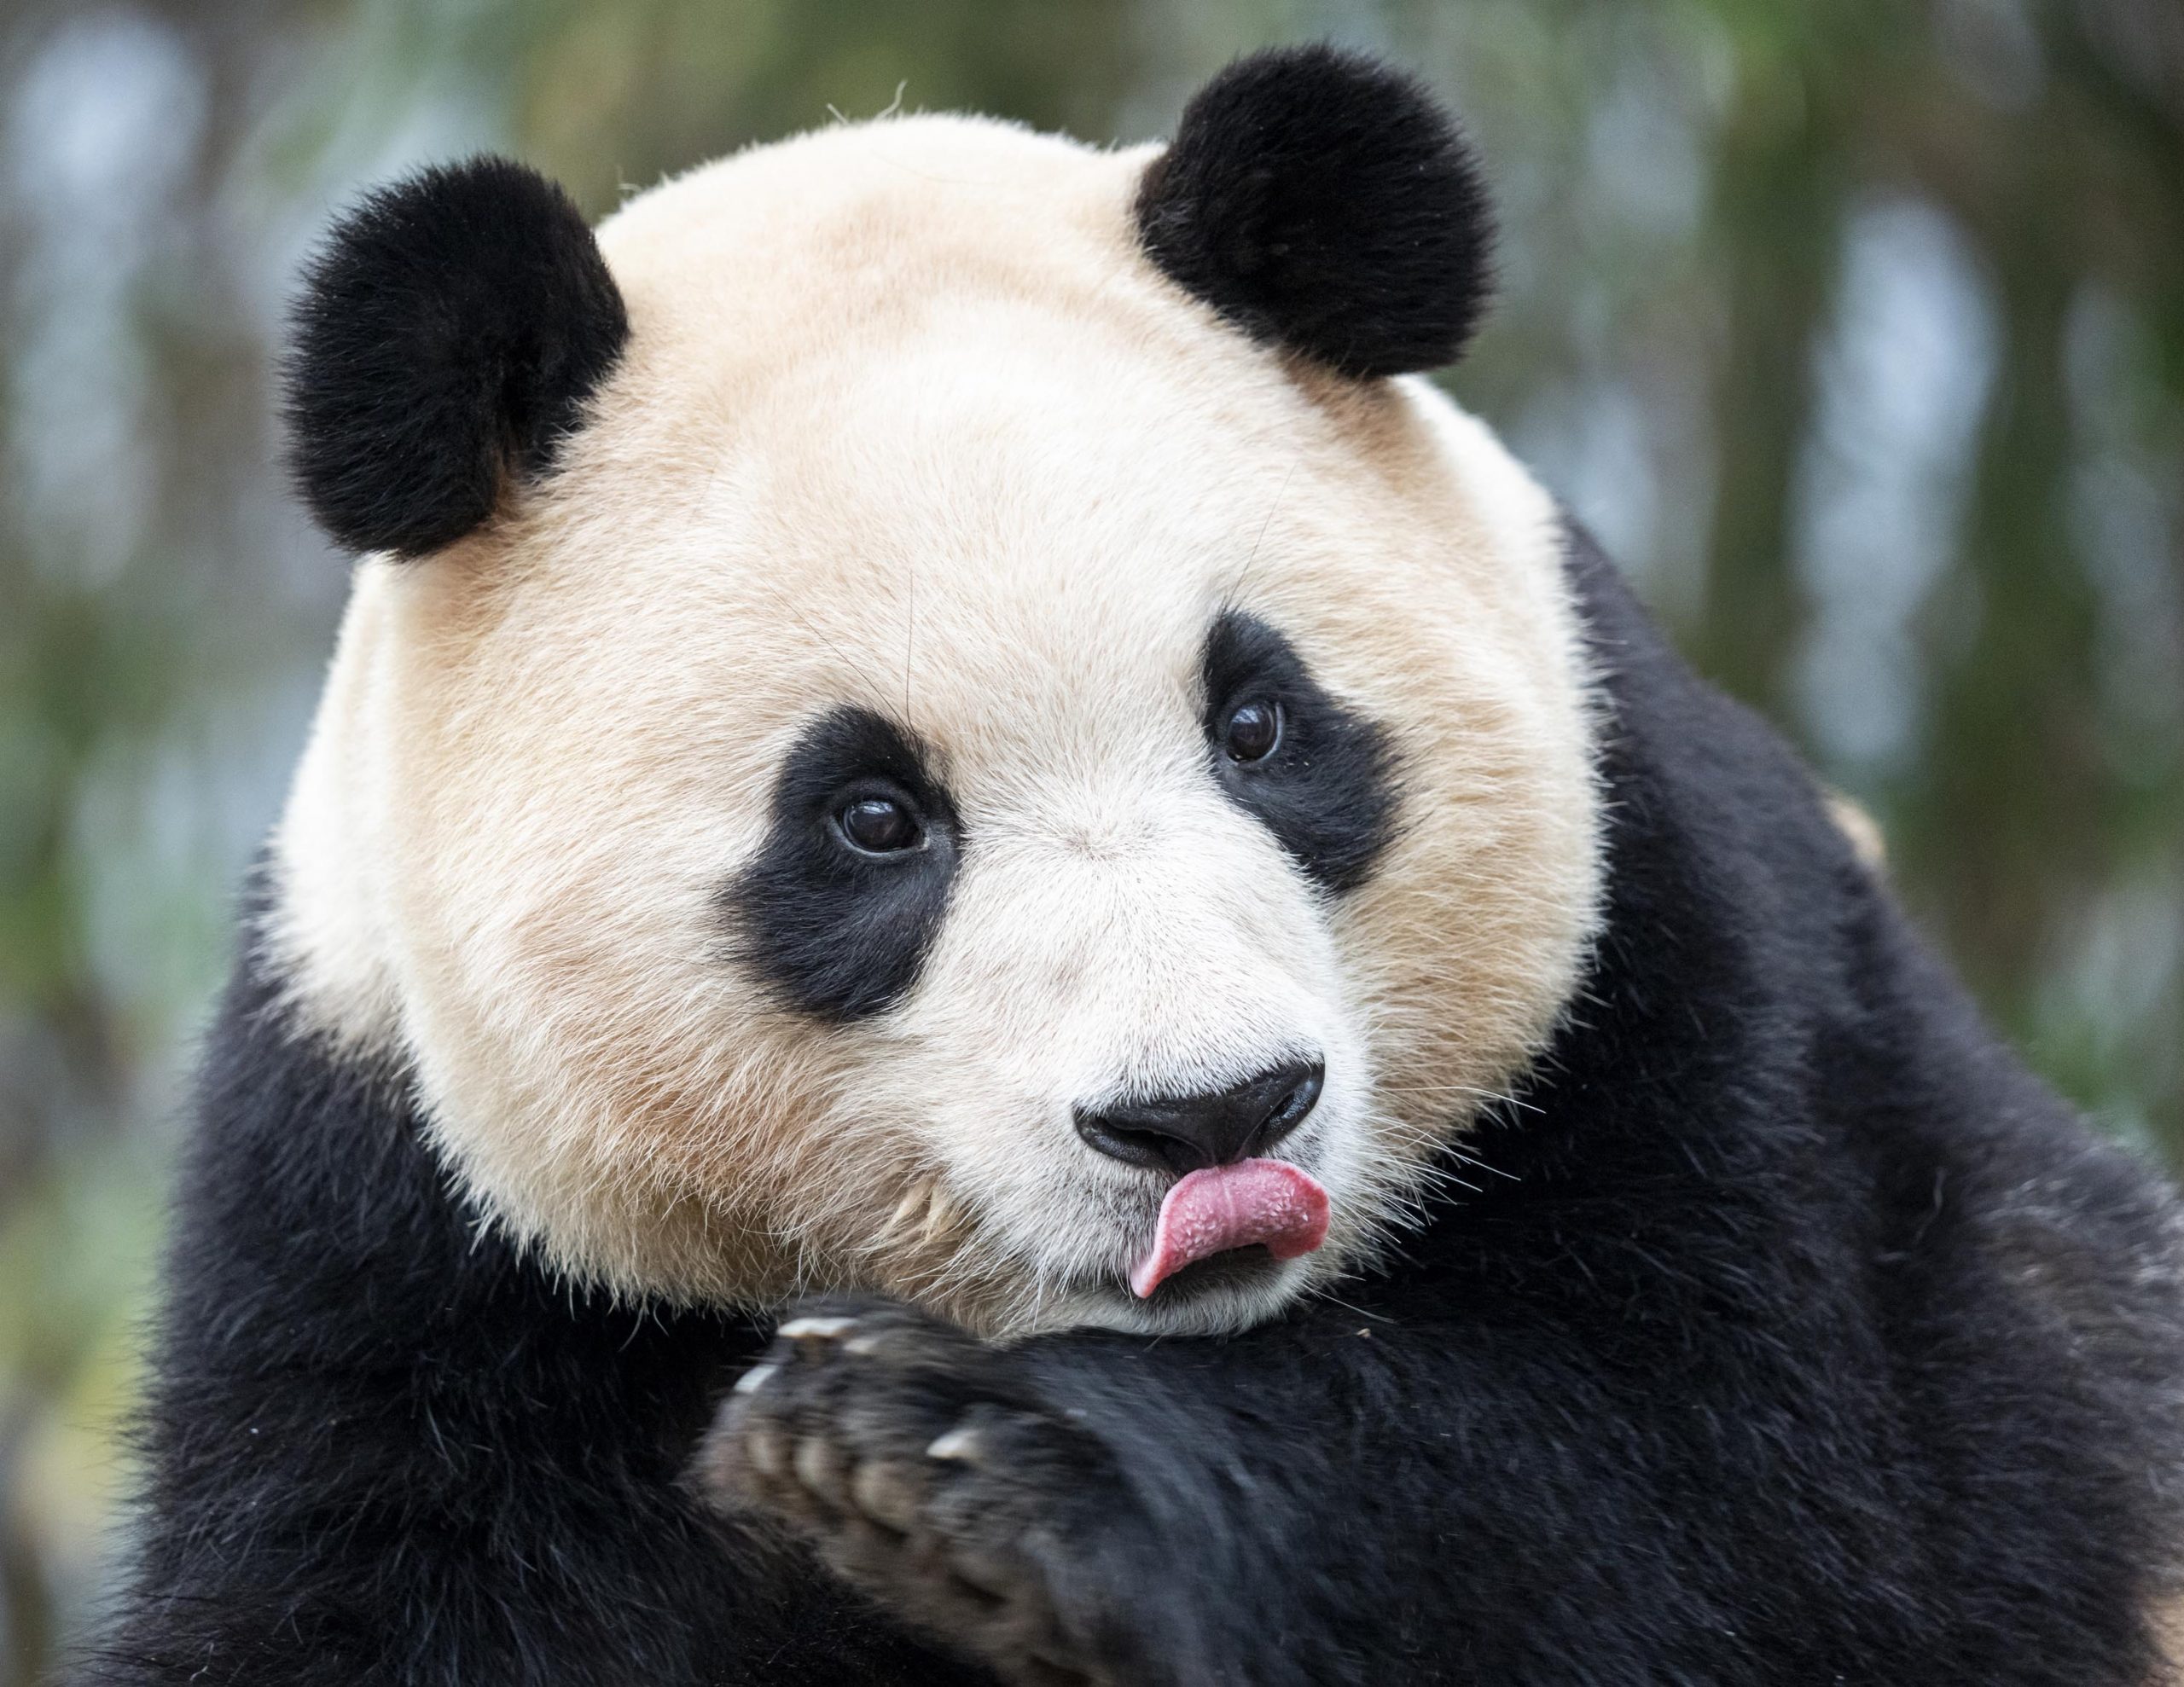 Fu Bao has been a crowd-pleaser ever since she was born in 2020.